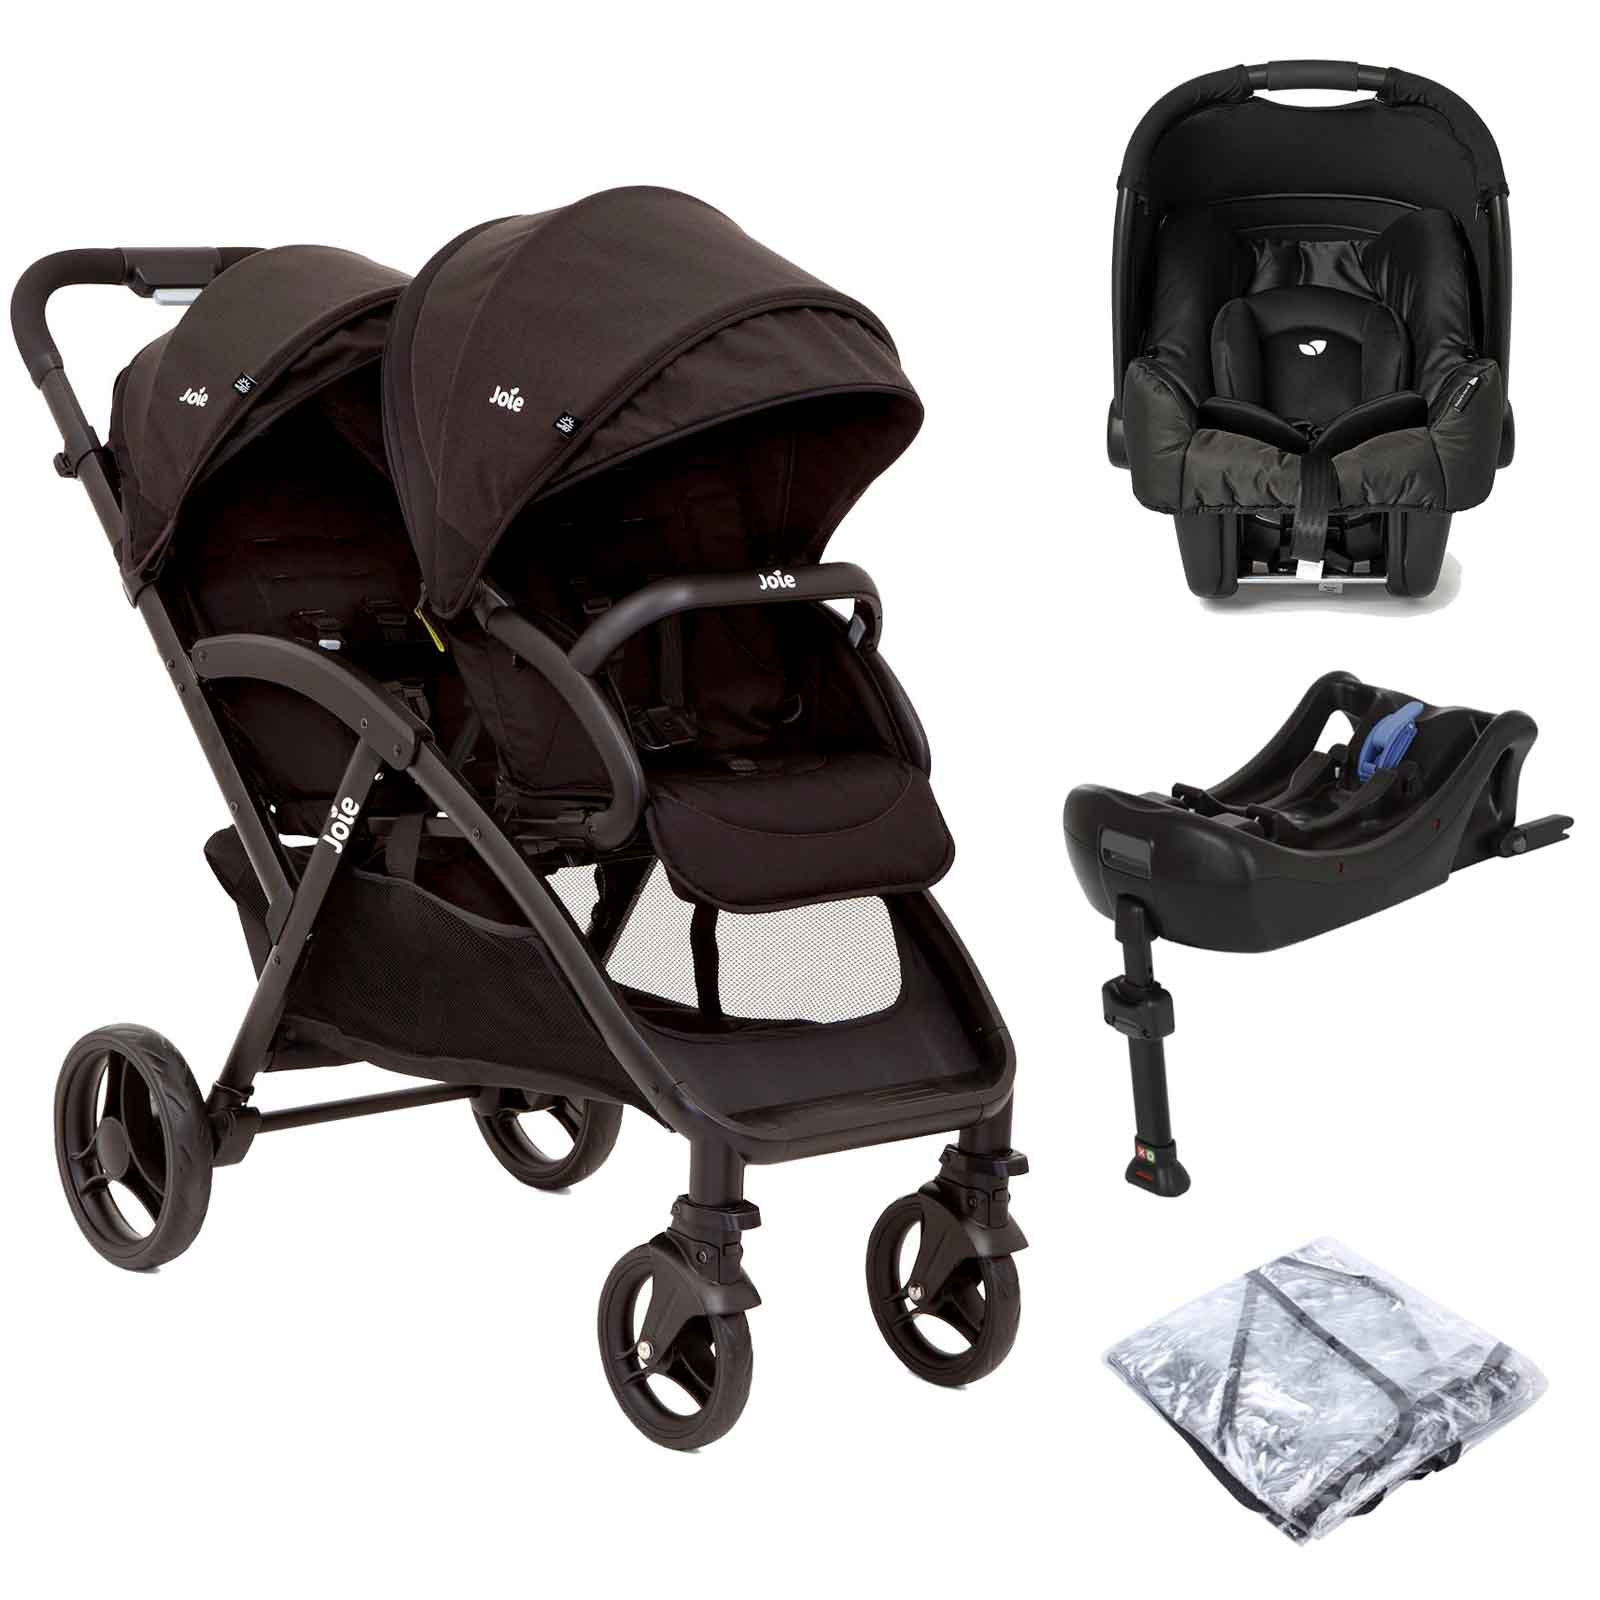 Joie Evalite Duo Tandem (Gemm) Travel System and Base - Coal